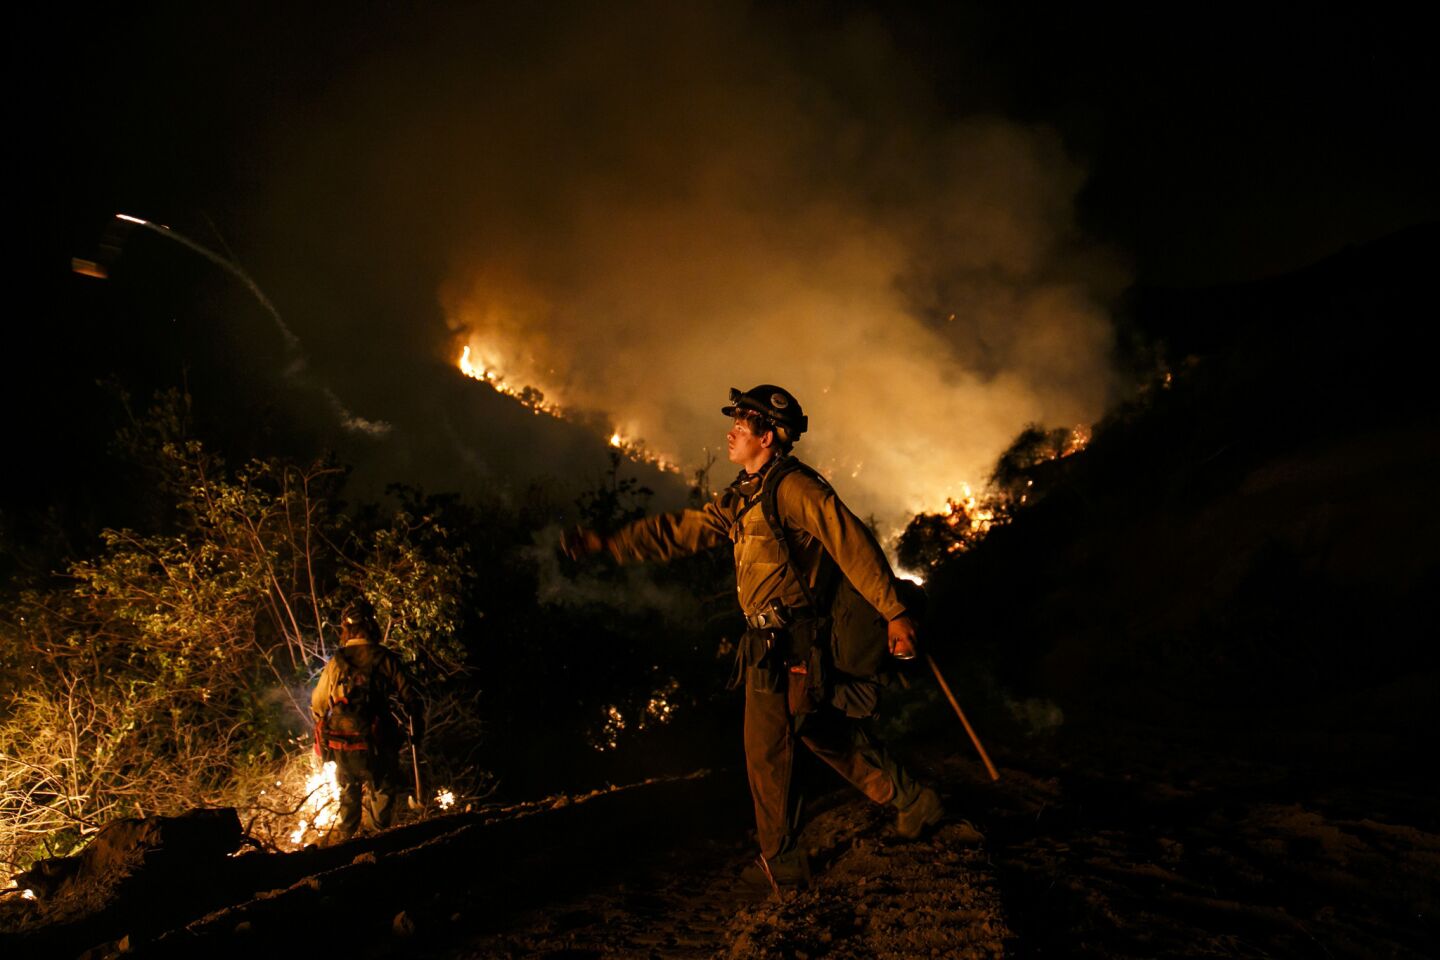 A firefighter torches the dry foliage during a burn-out operation in El Capitan Canyon.